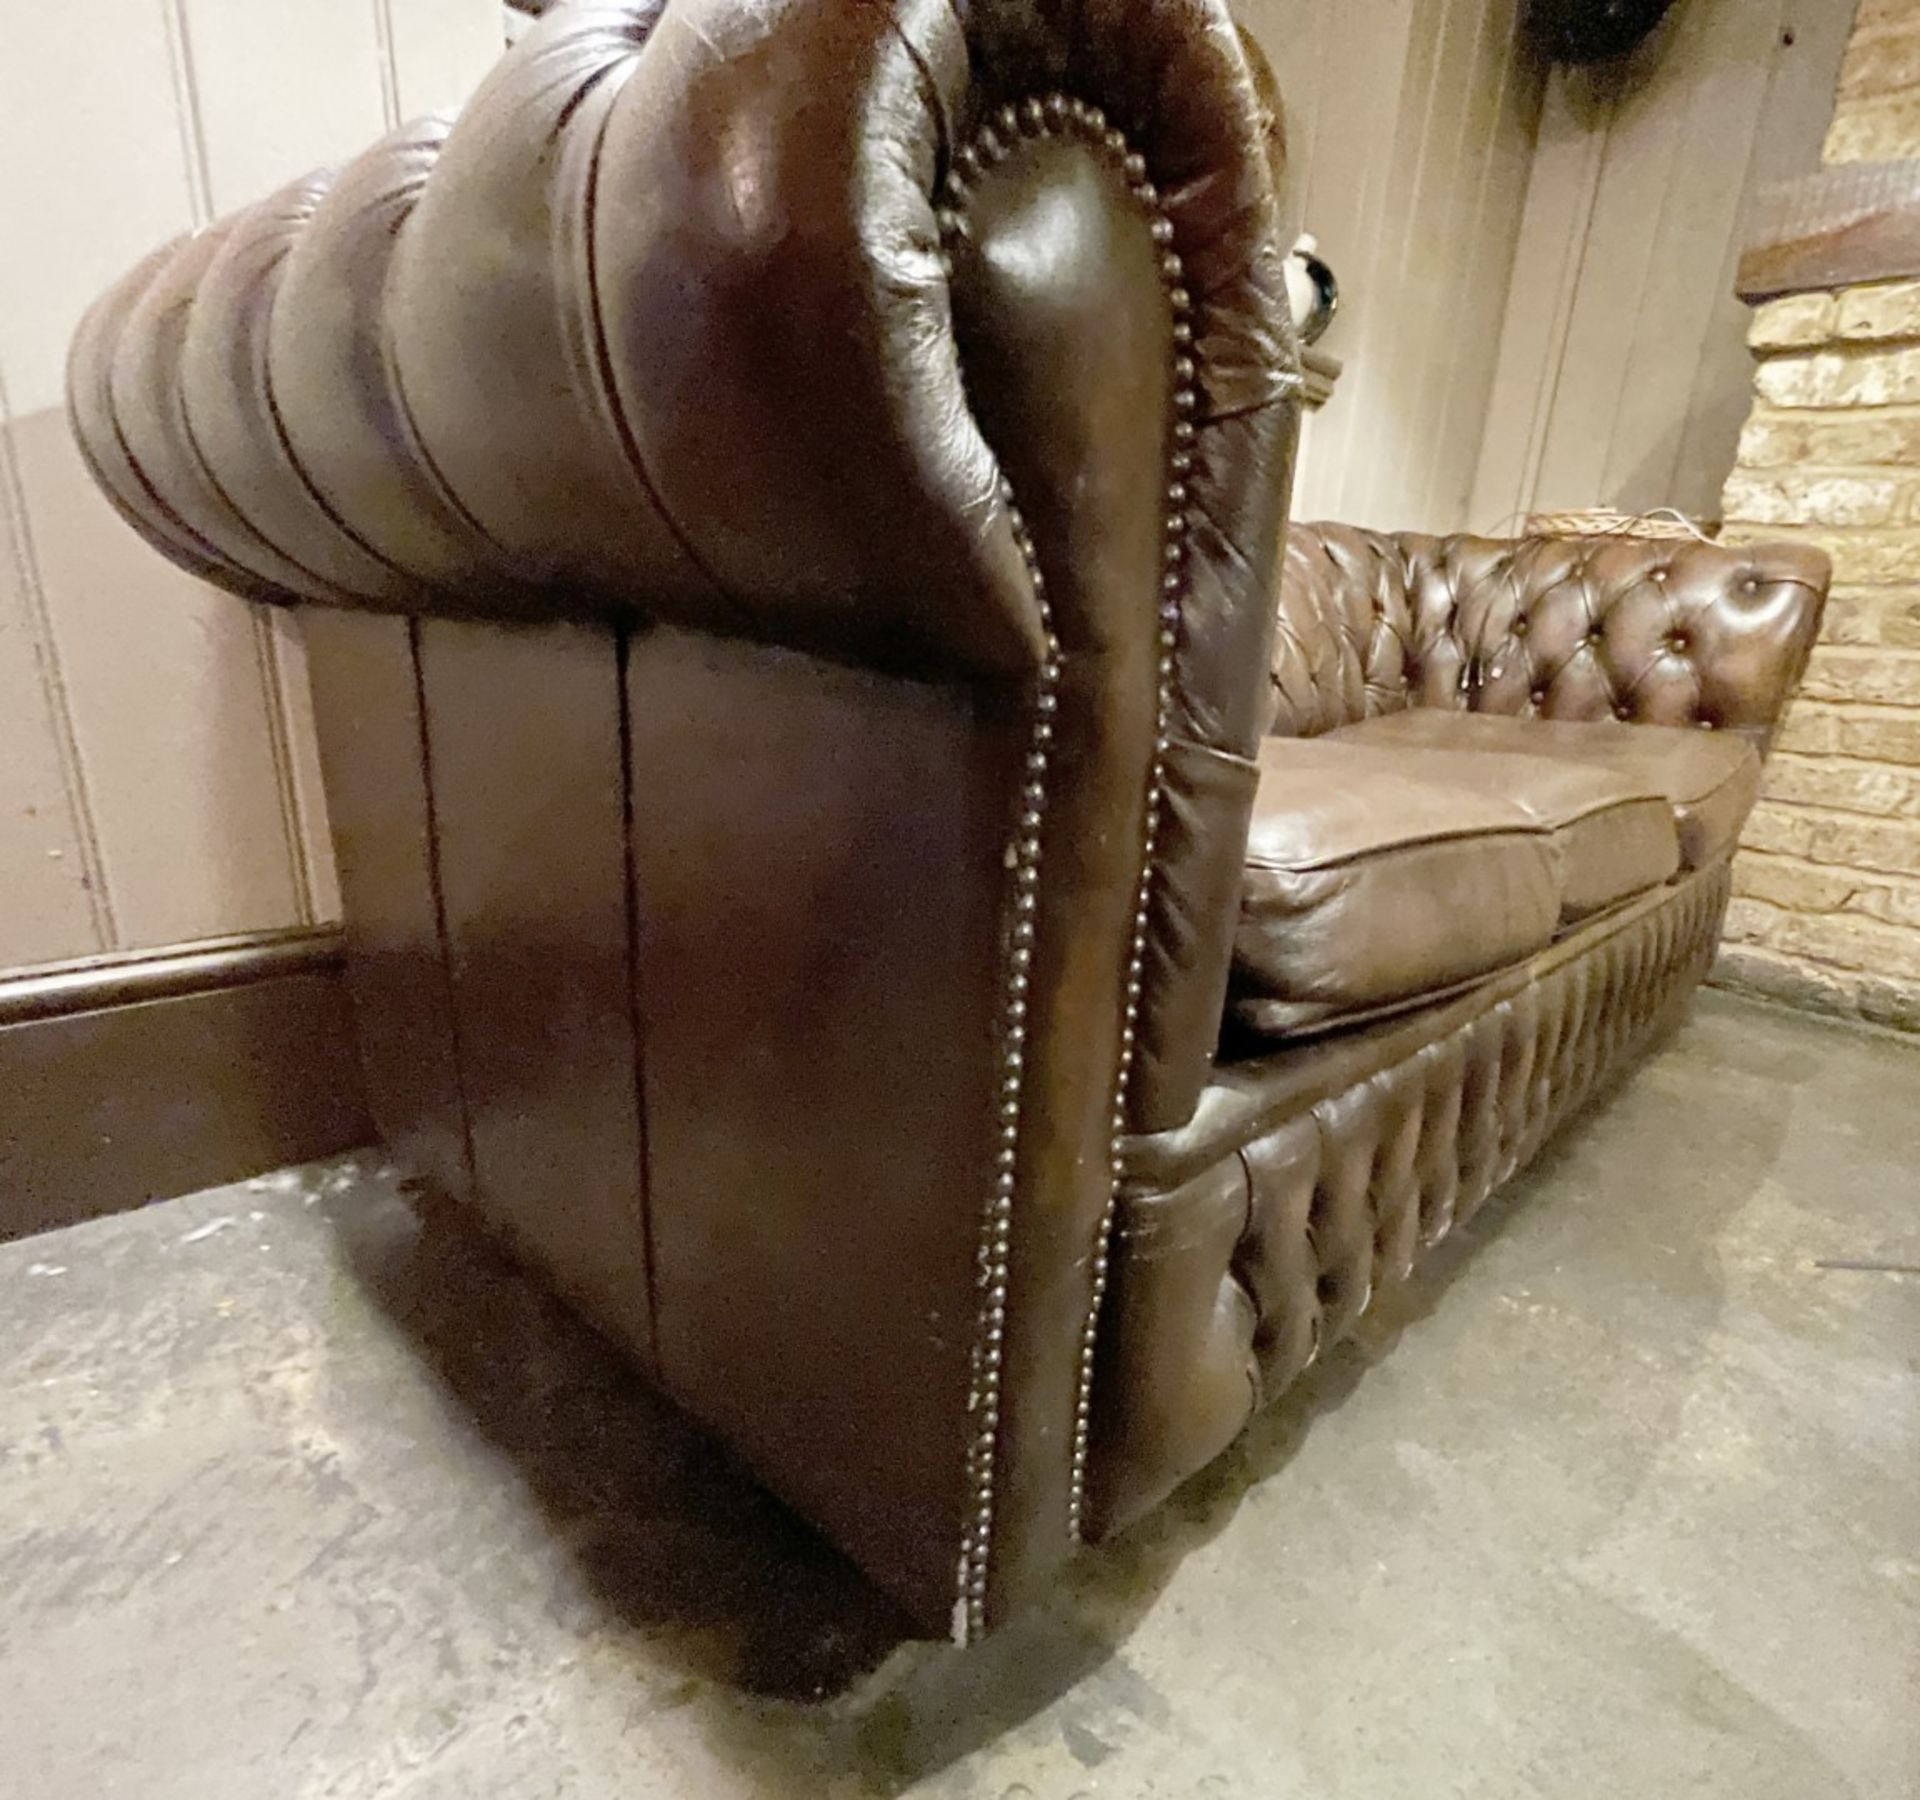 1 x Vintage Premium Handmade Brown Leather Button-back Chesterfield 3-Seater Studded Sofa - Image 7 of 8